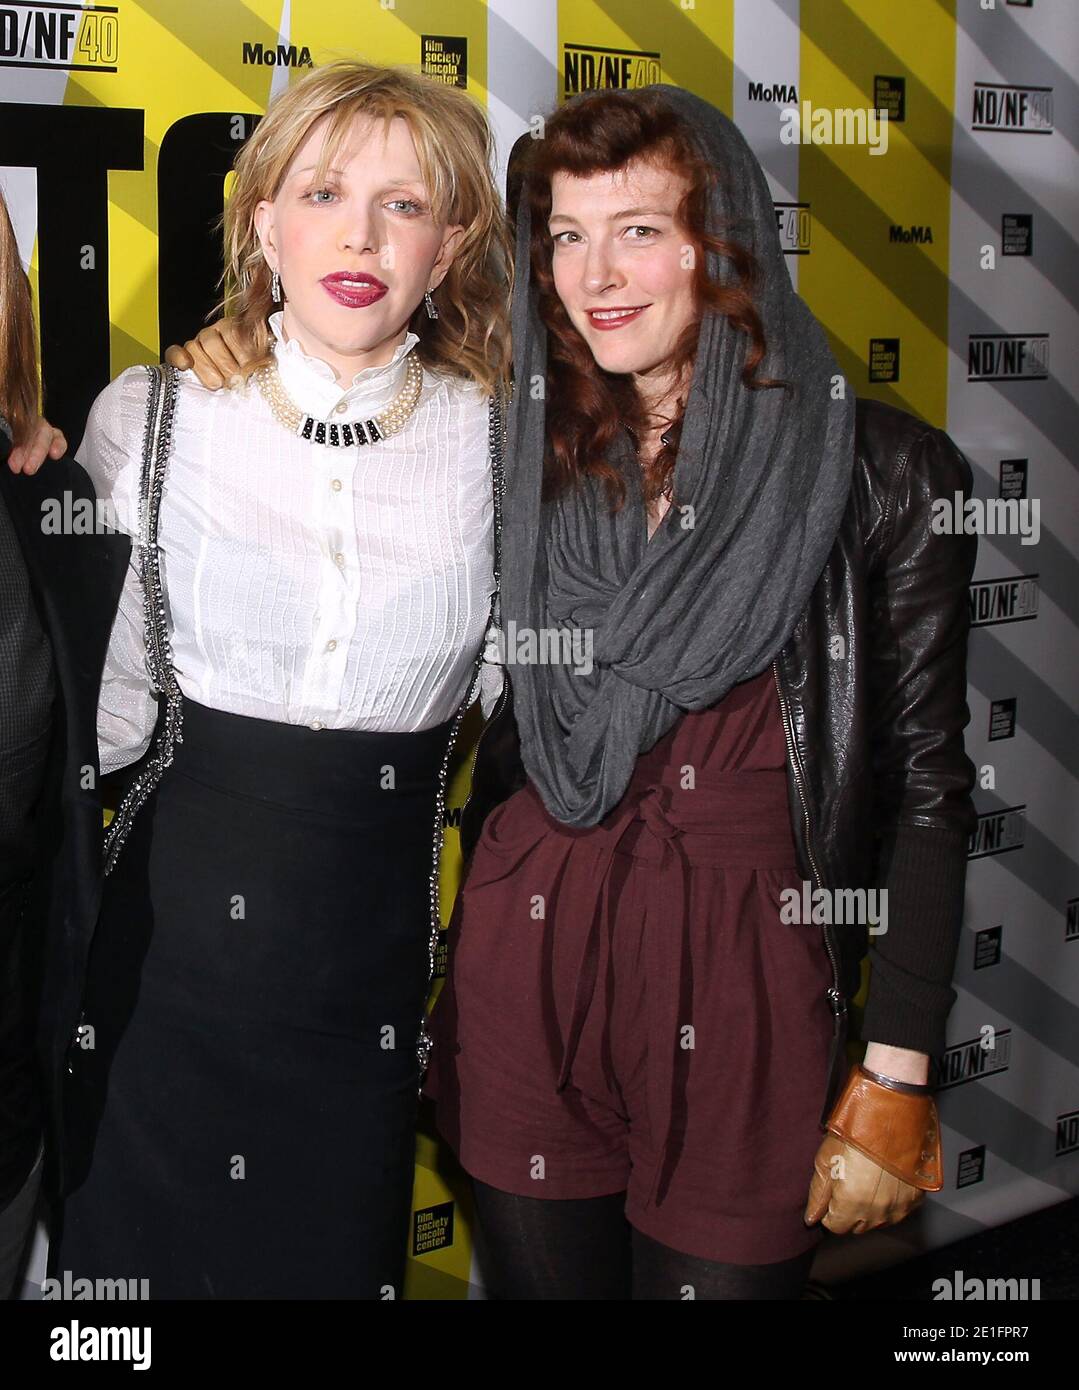 Musicians/film subject Courtney Love (L) and Melissa auf der Maur attending the 2011 New Directors/New Films screening of 'Hit So Hard' at The Museum of Modern Art in New York City, NY, USA on March 28, 2011. Photo by Charles Guerin/ABACAPRESS.COM Stock Photo